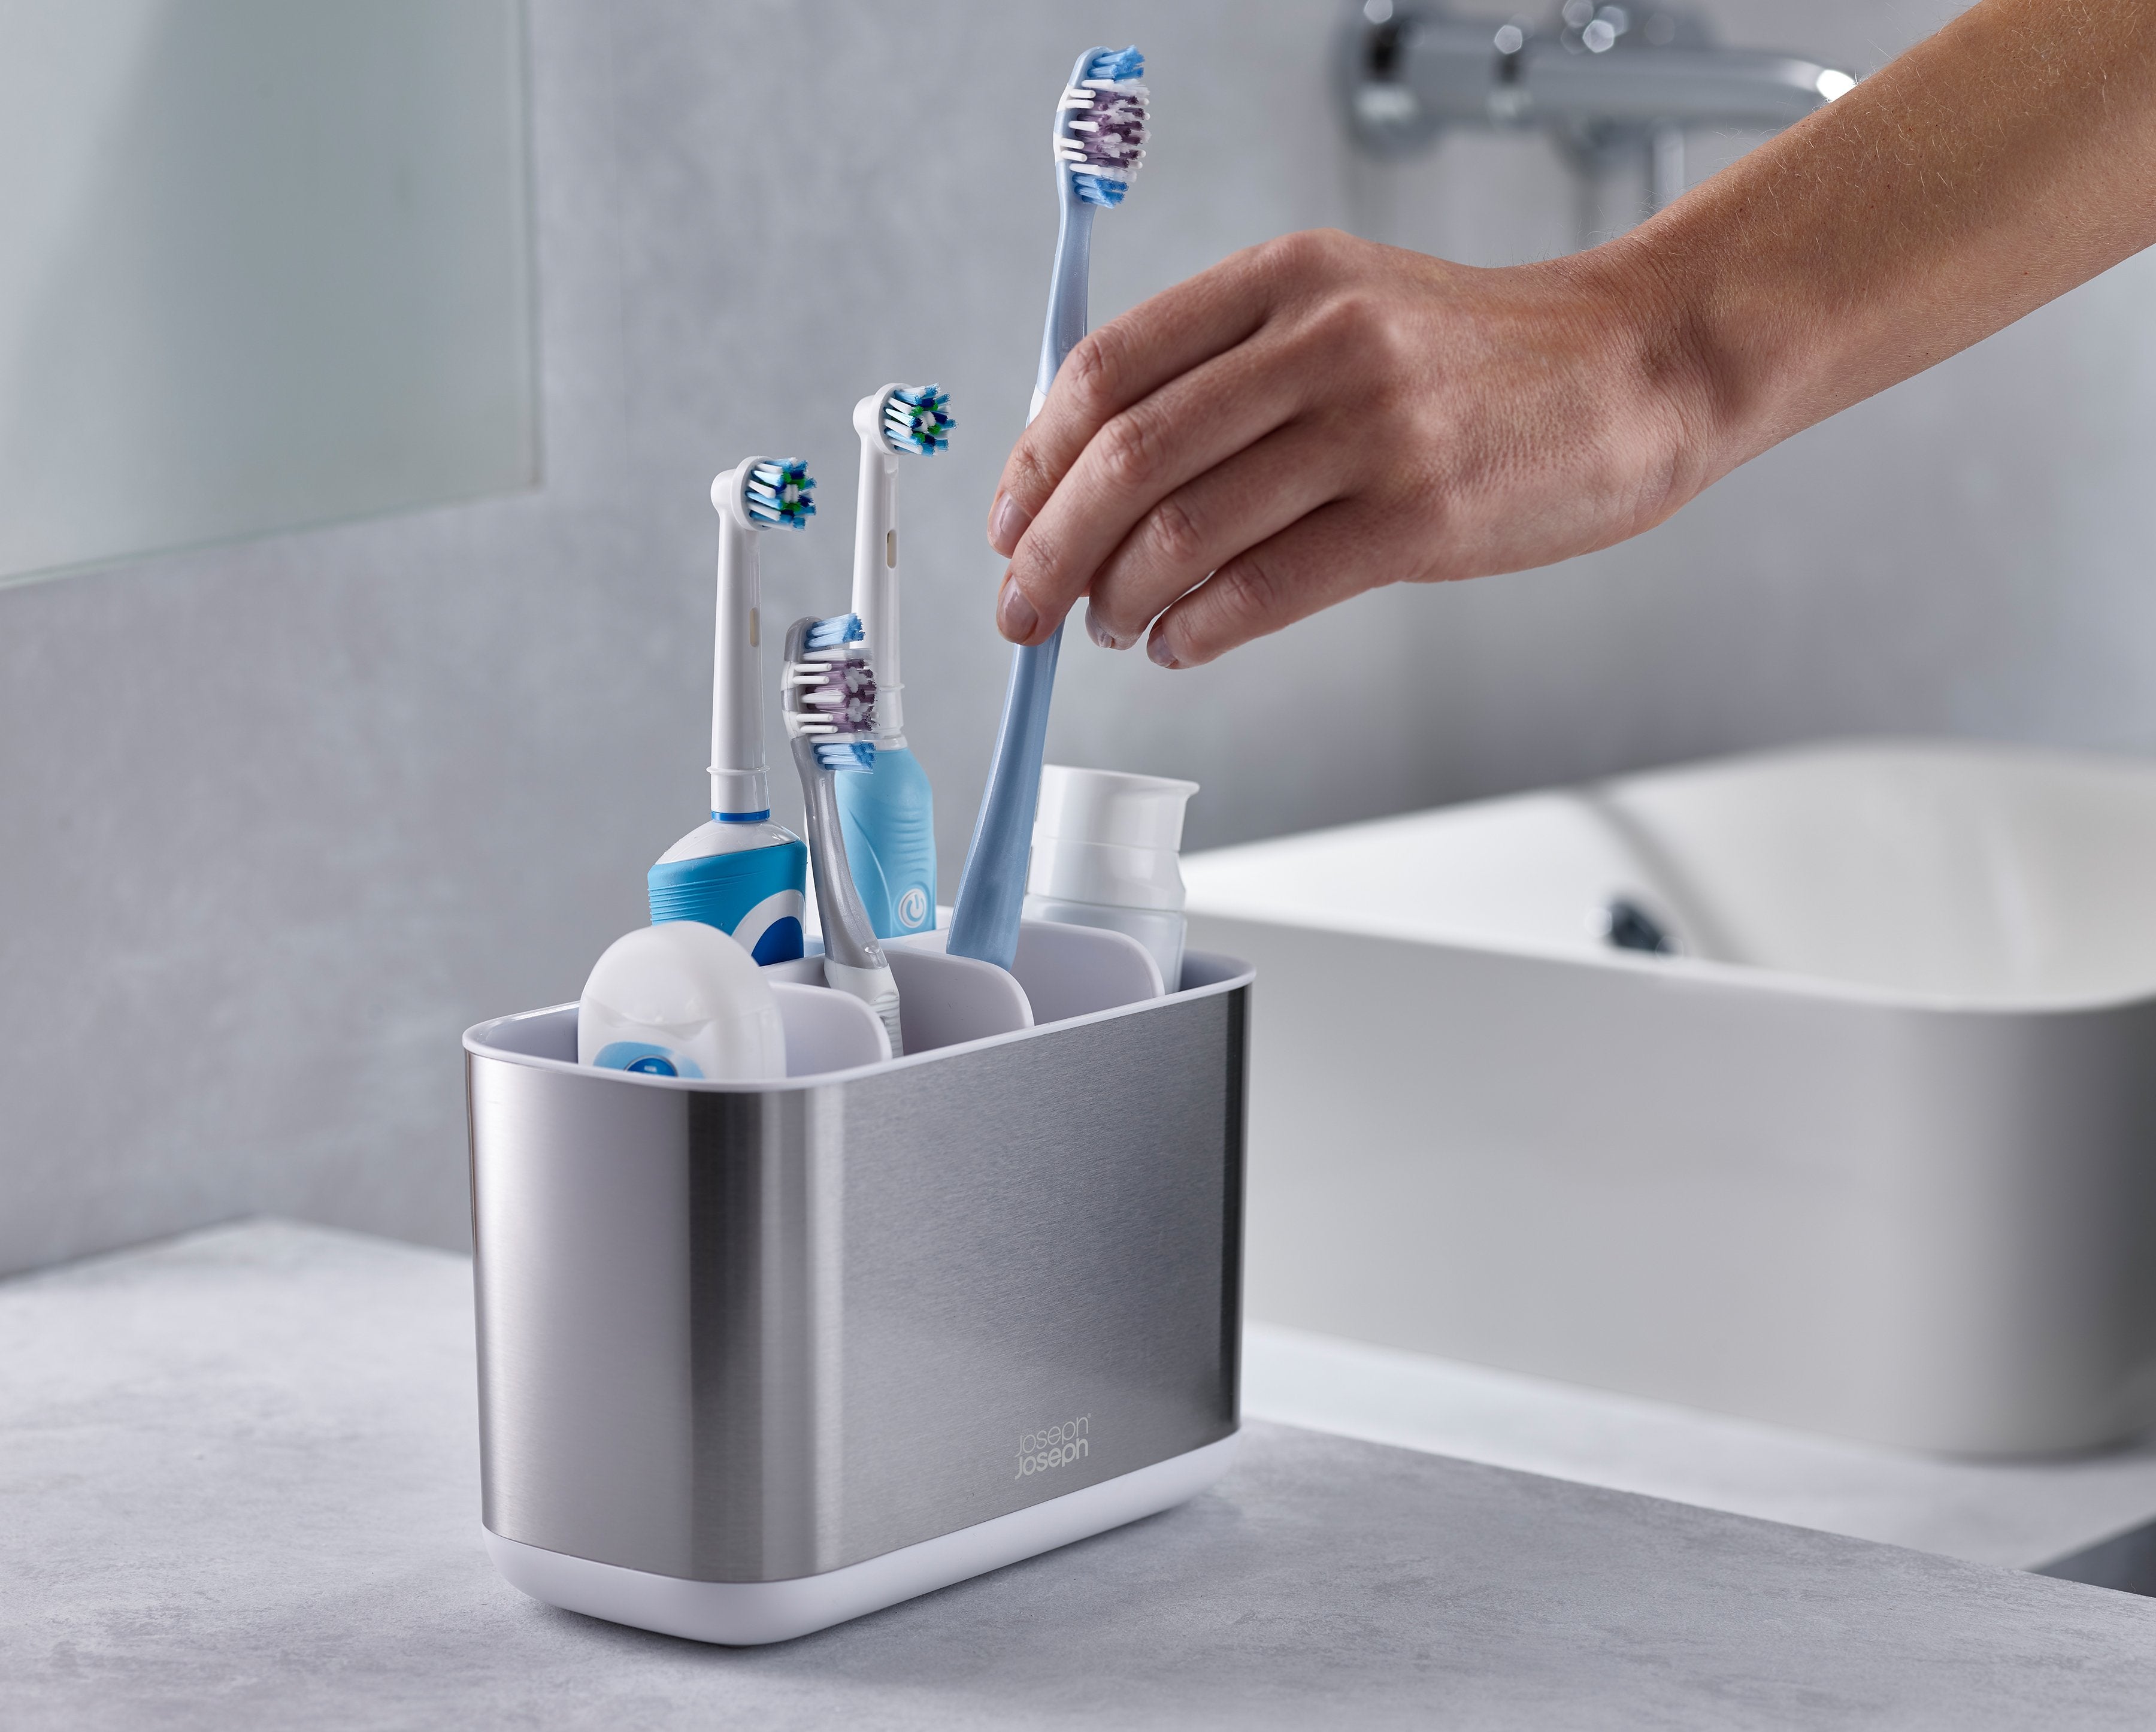 BEON.COM.AU  These compact toothbrush caddies are divided into different sections to provide organised storage for a variety of oral care items, such as manual or electric toothbrushes and toothpaste tubes.  Suitable for storing electric or battery toothbrushes and toothpaste tubes Stainless-steel finish wit... Joseph Joseph at BEON.COM.AU